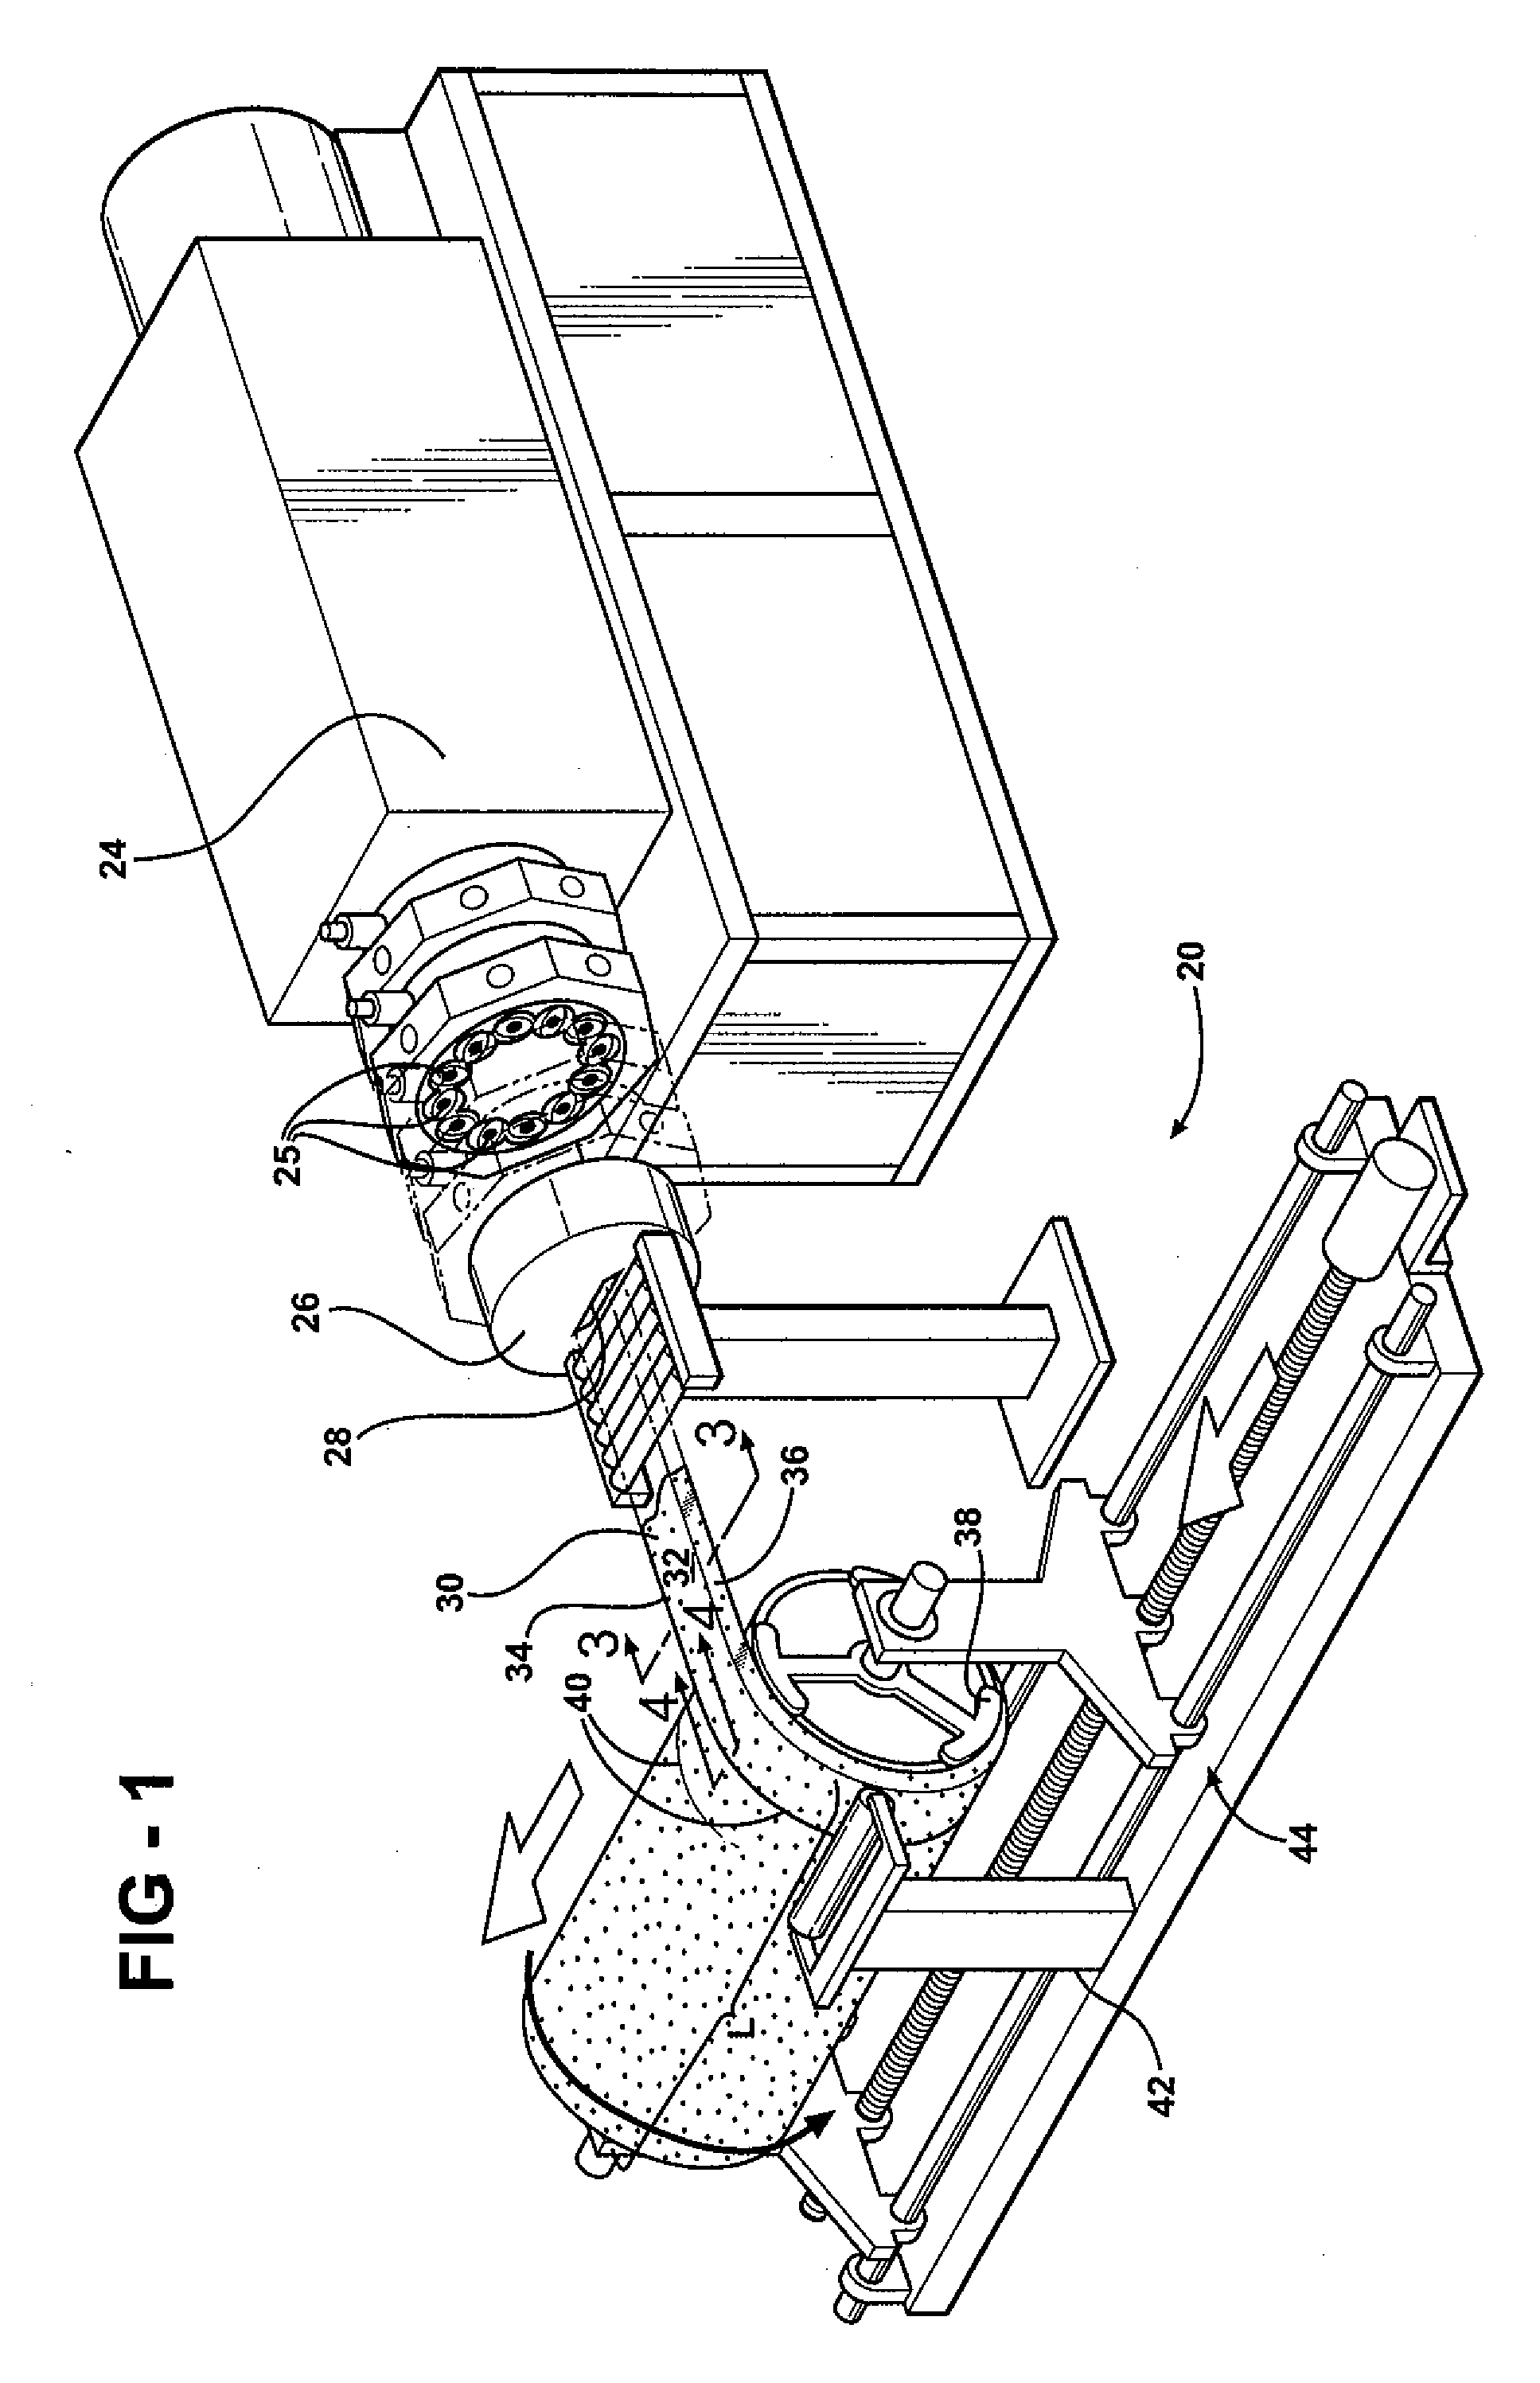 Manufacturing apparatus and method for producing a preform